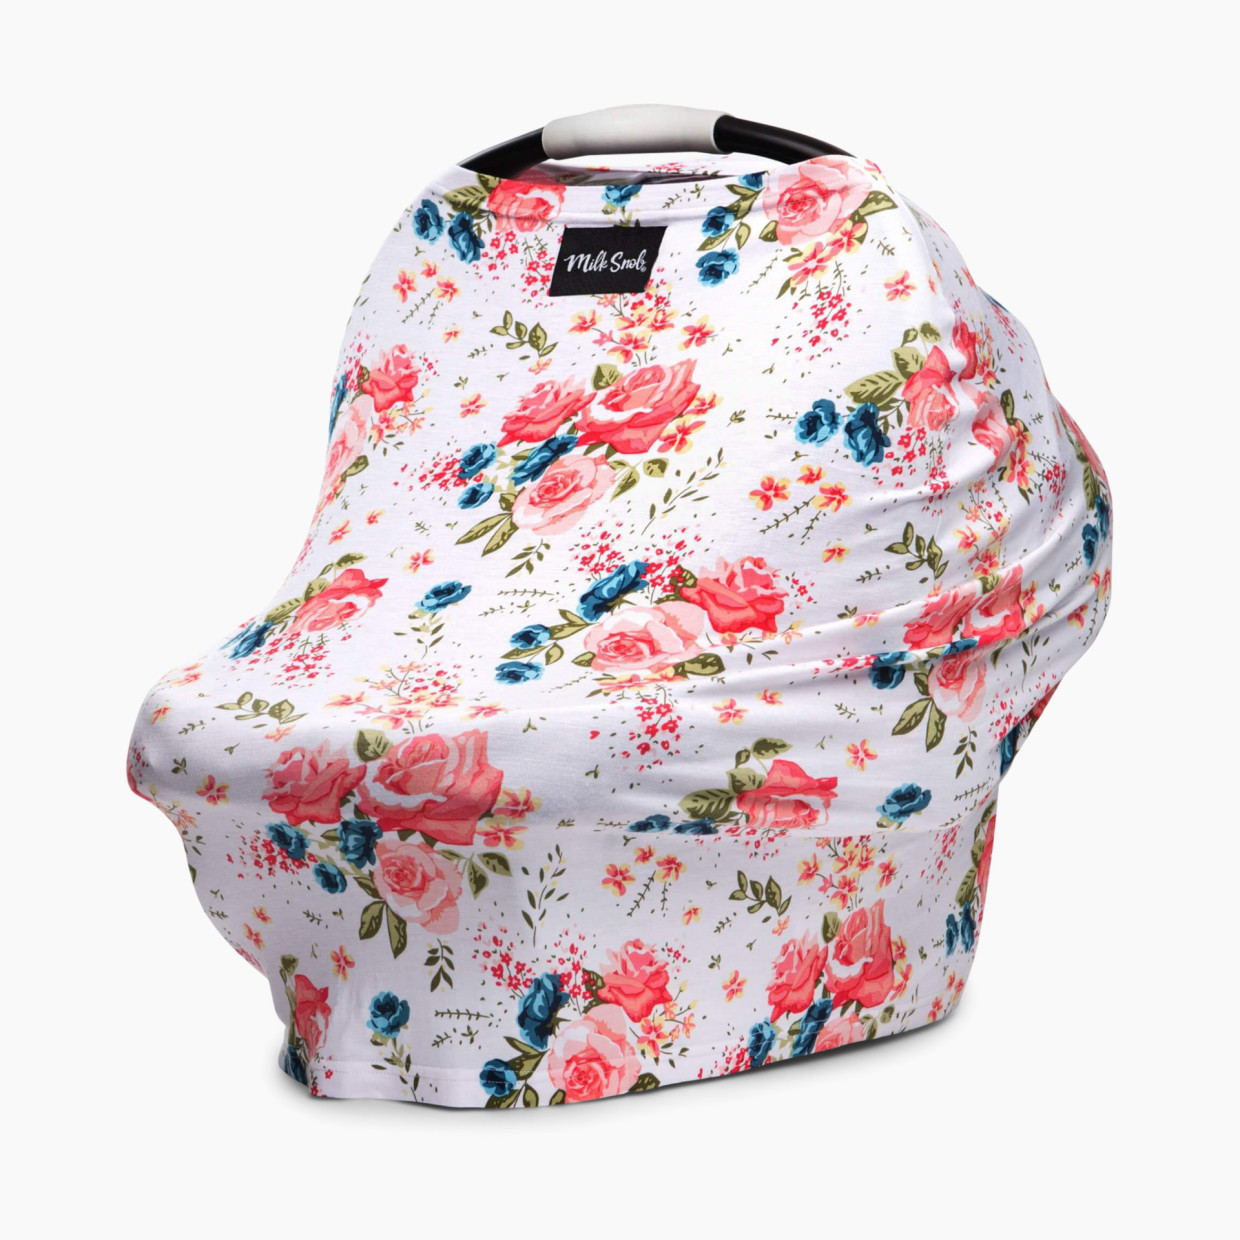 Milk Snob 5-in-One Cover - French Floral.